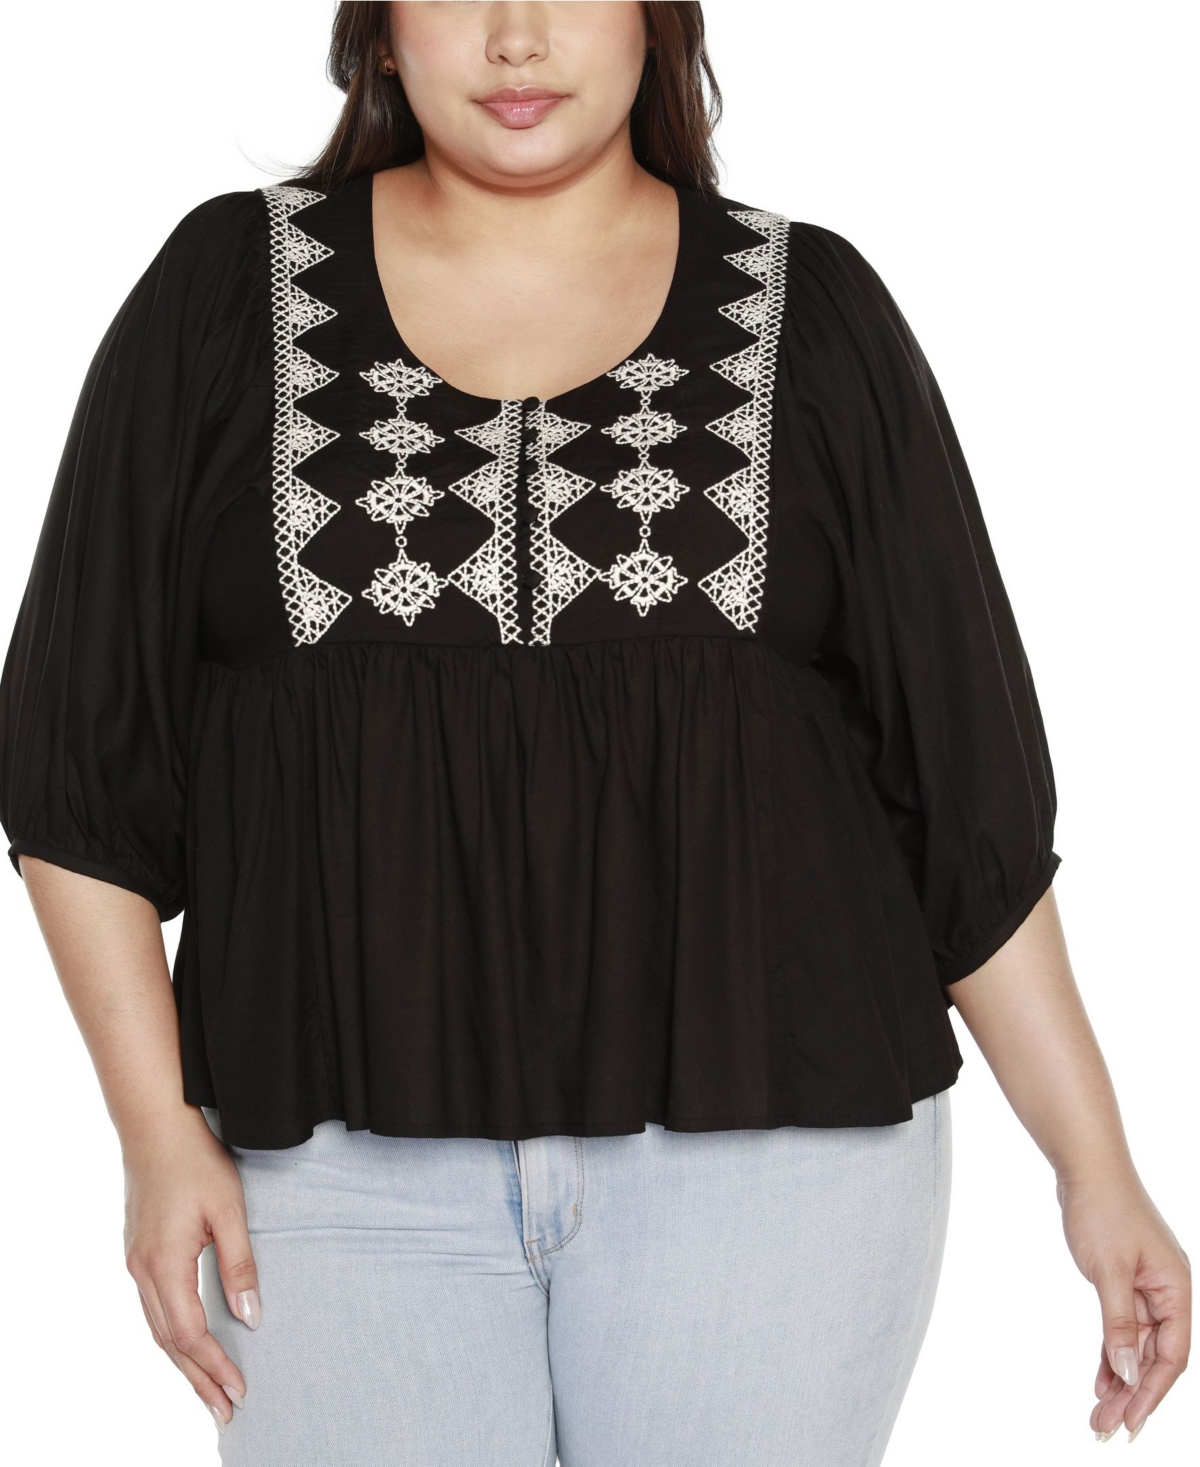 Shop Belldini Black Label Plus Size Embroidered Boho Fit And Flare Top